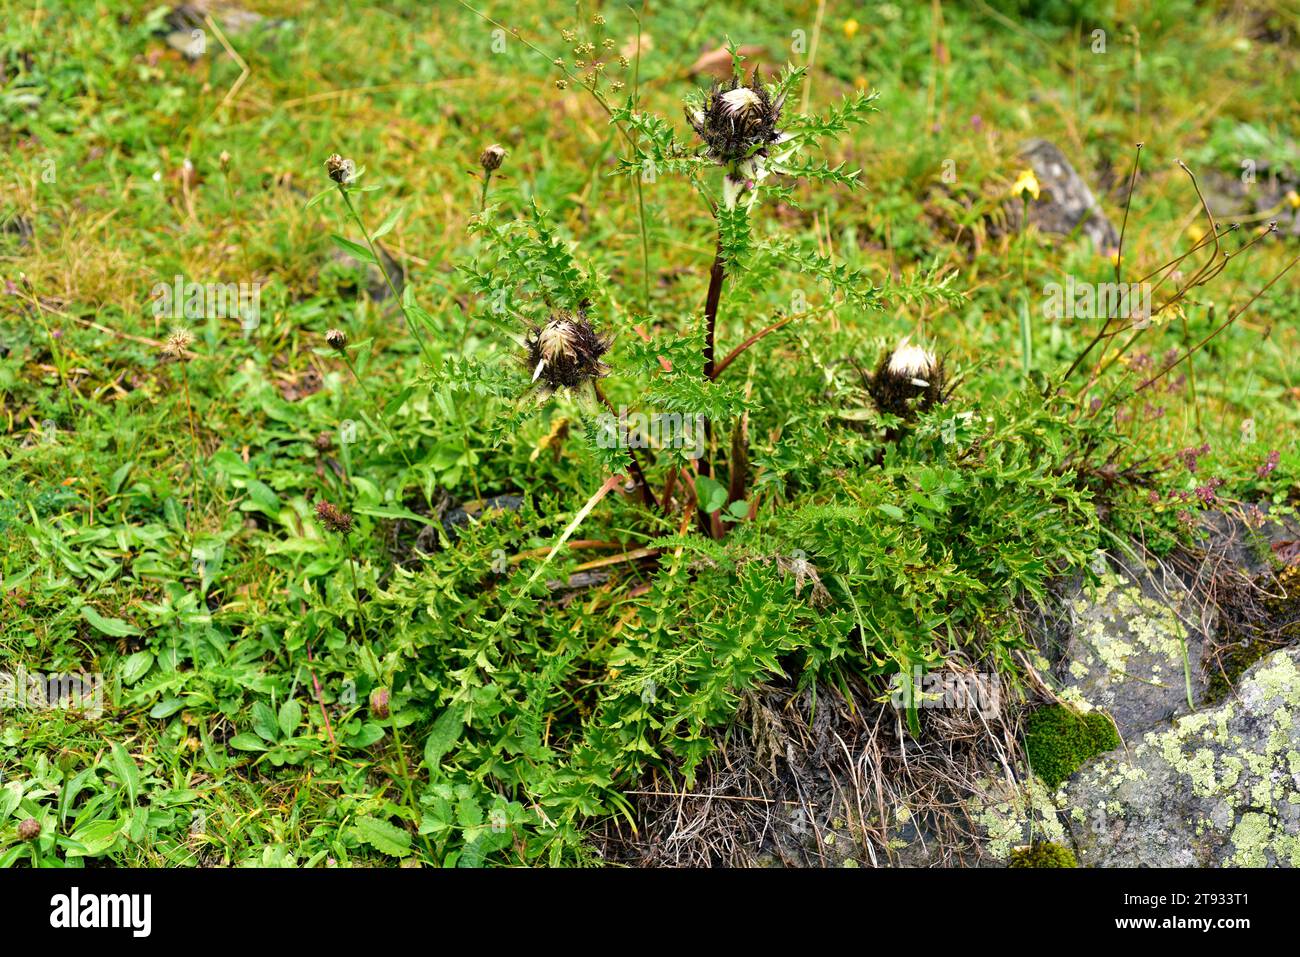 Dwarf carline thistle or silver thistle (Carlina acaulis) is a perennial plant native to alpine regions of Europe. This photo was taken in Val d'Aran, Stock Photo